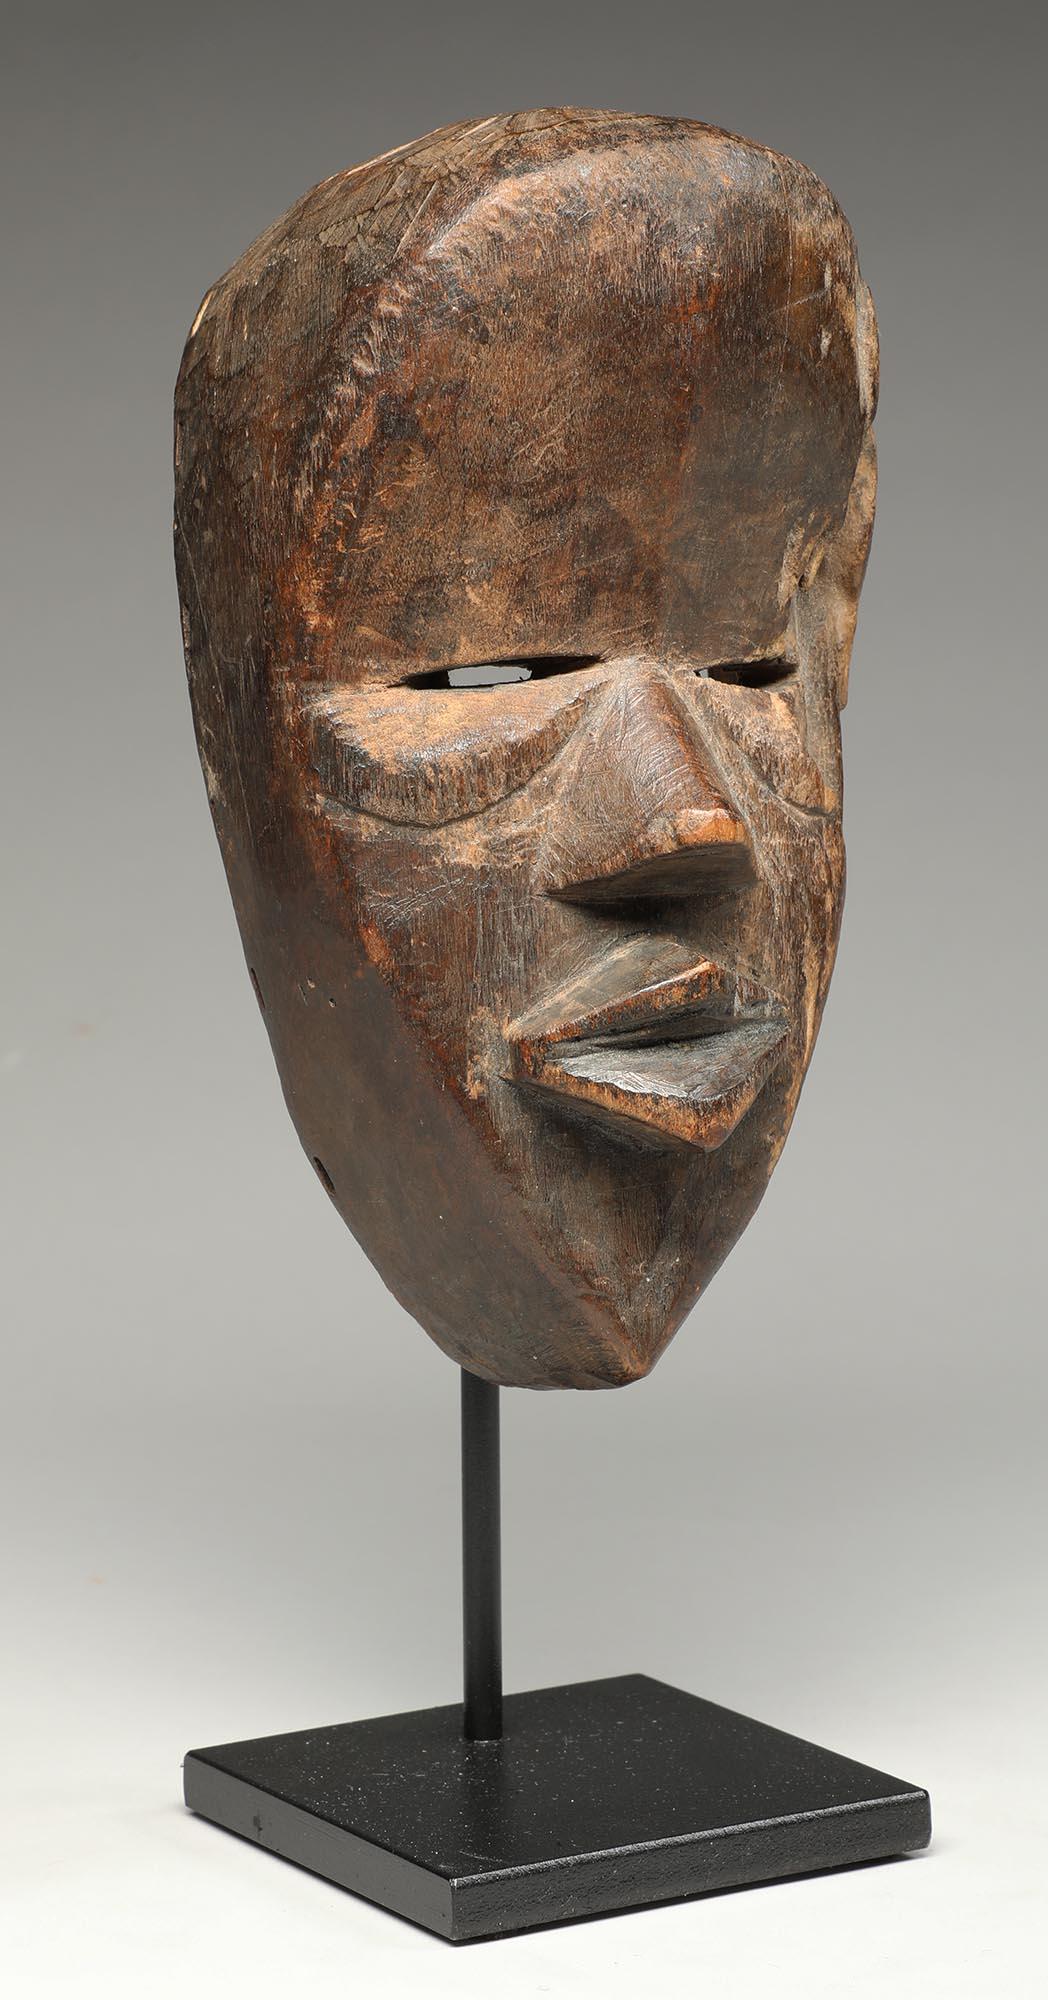 Tribal Small Old Dan Mask Blessed by Age Eroded Side, Cubist Face Liberia, Africa